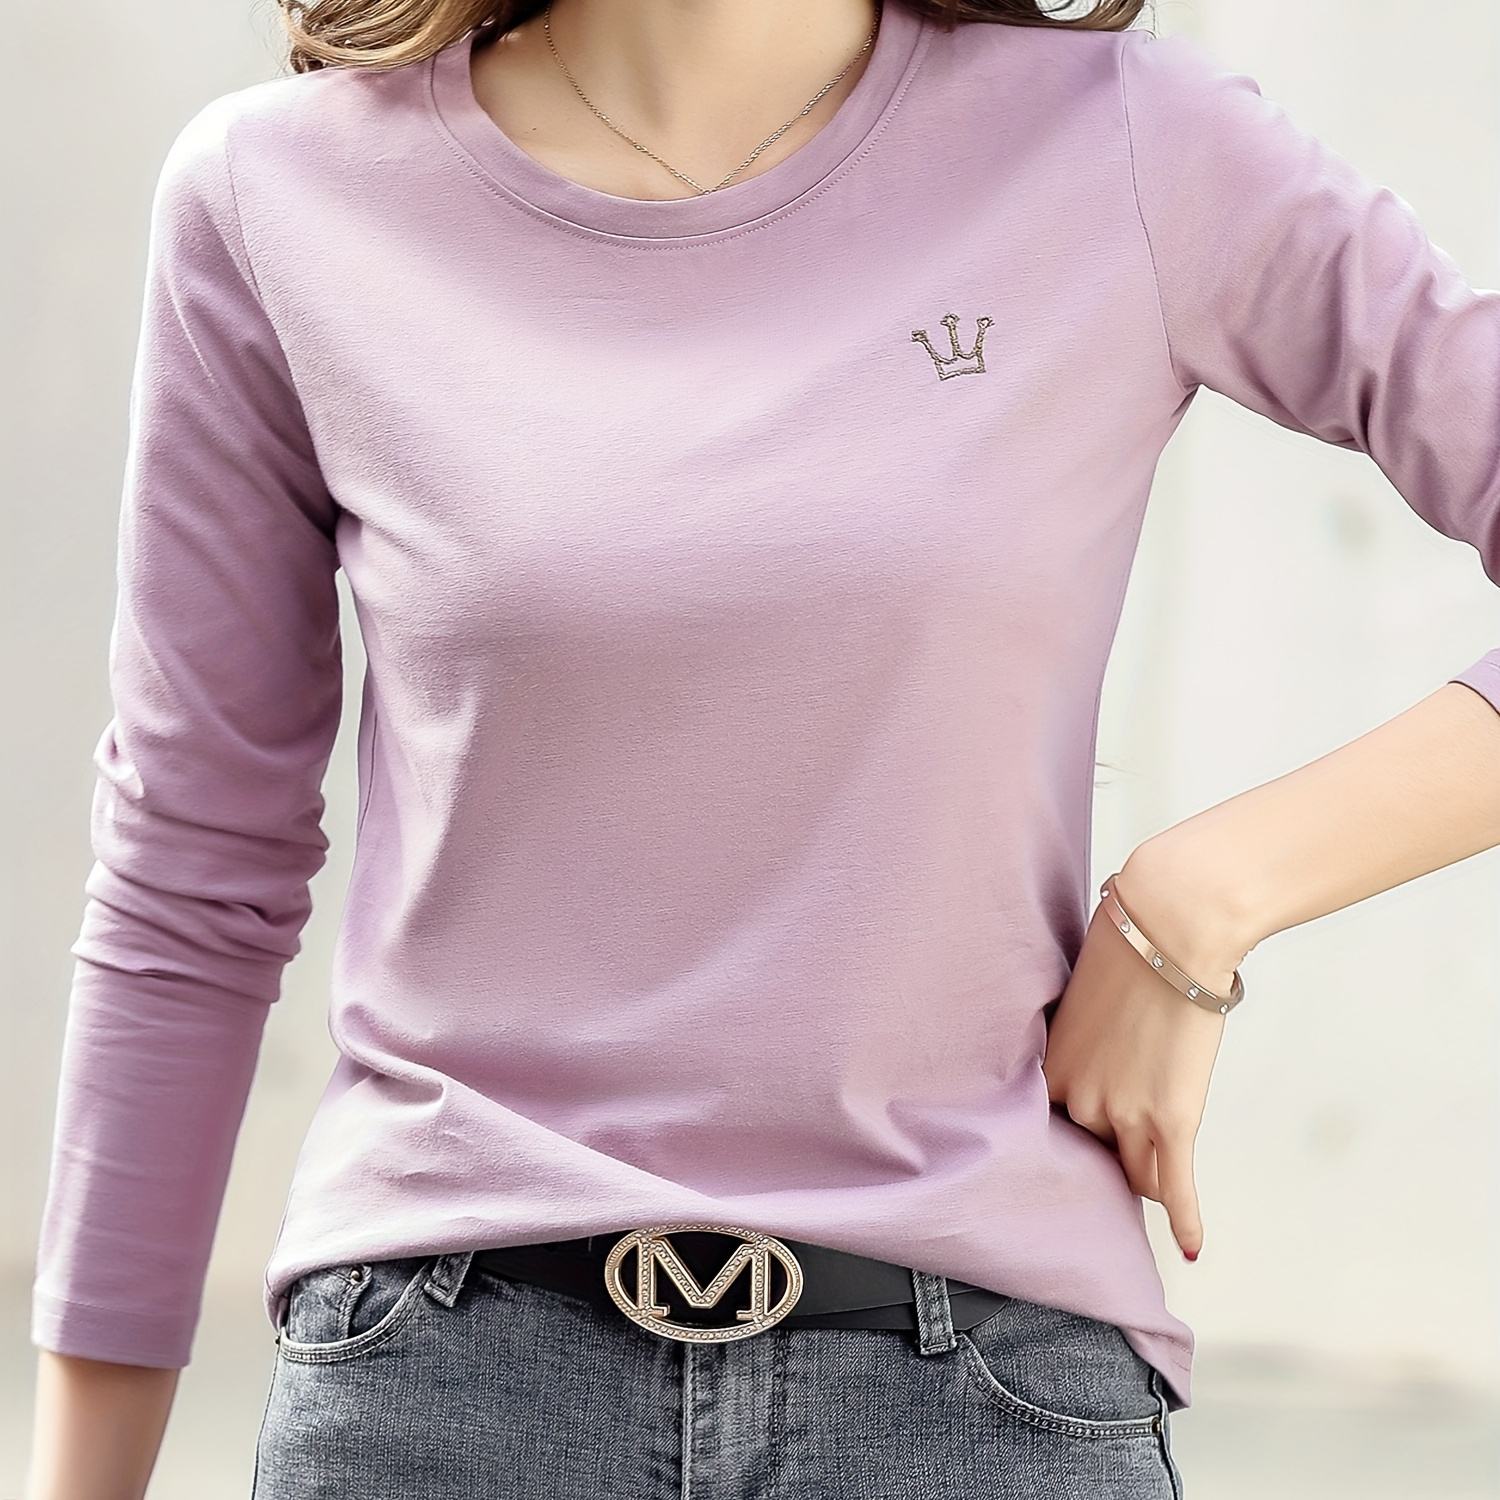 

Crown Print Crew Neck T-shirt, Casual Long Sleeve Simple Top, Women's Clothing